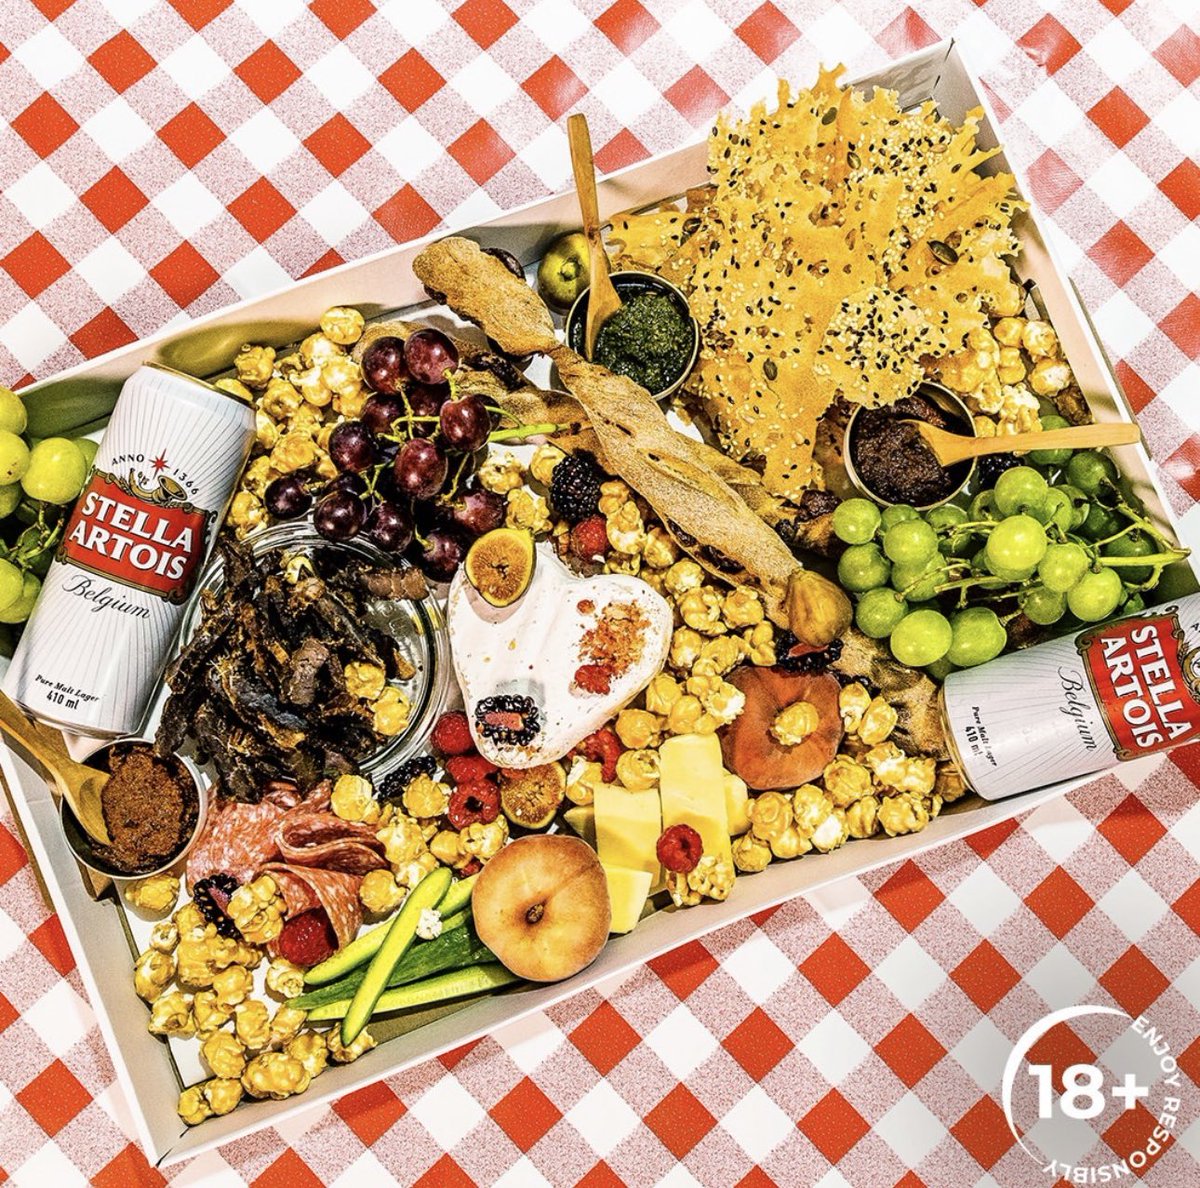 SAFARI PICNIC 2024 - A SAFARI EXPERIENCE IN THE CITY! 🥂

🟤 FOOD 🟤 FASHION 🟤 MUSIC 

The weather is nice and the beer is perfectly chilled! 👌🏾

@StellaArtois is at the 6th annual #SafariPicnic2024 on 20th April at Foxdale Forest! 🤎🪵☀️🍂 🥂

#PRgirl2024